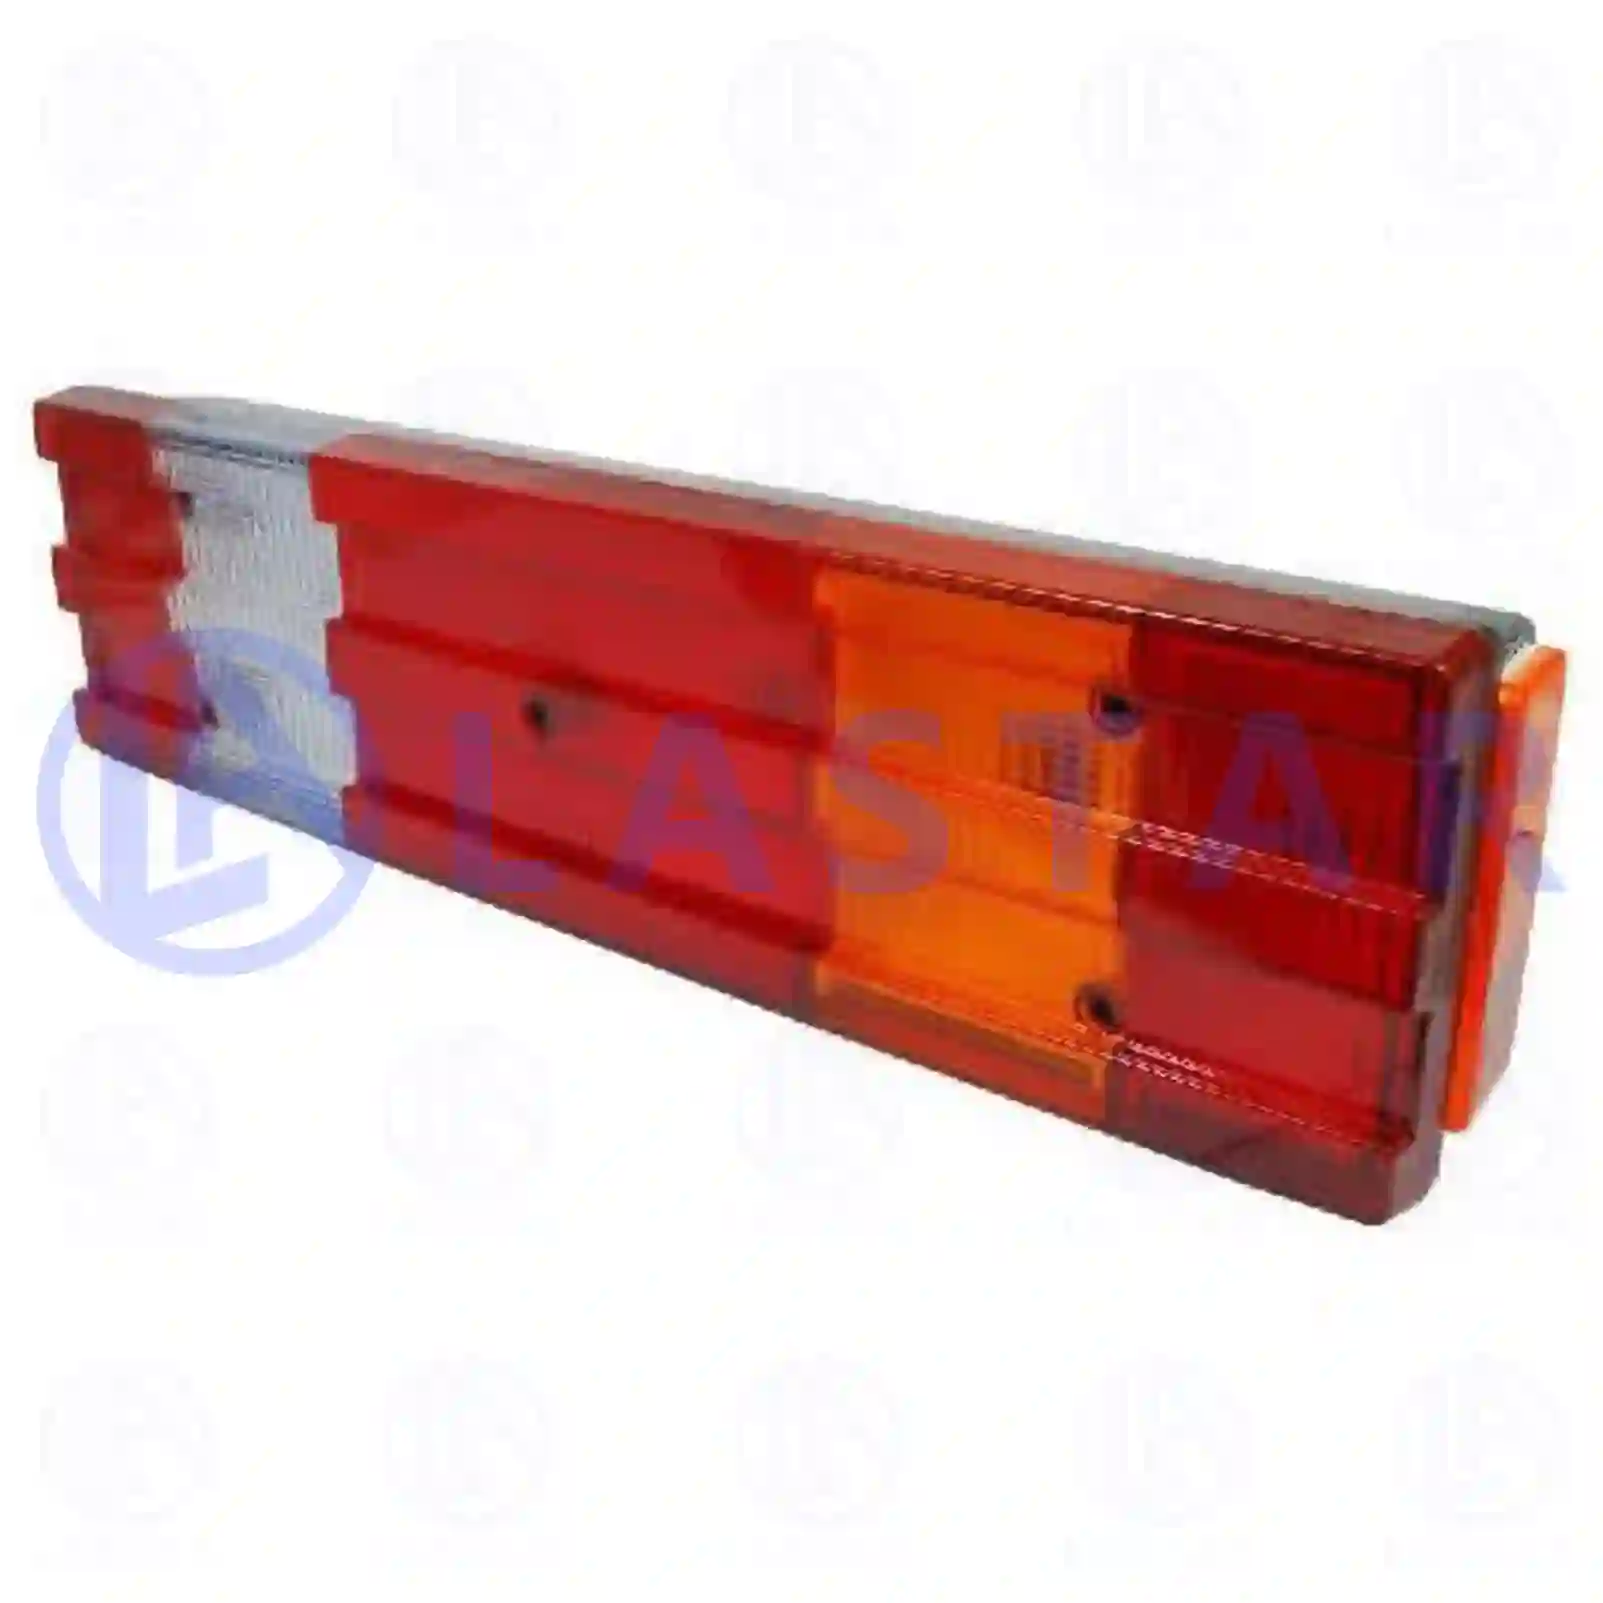 Tail lamp, right, 77711746, 880195, 7126235, 26399, 0015405870, 0015406370, 001540637010, ZG21042-0008 ||  77711746 Lastar Spare Part | Truck Spare Parts, Auotomotive Spare Parts Tail lamp, right, 77711746, 880195, 7126235, 26399, 0015405870, 0015406370, 001540637010, ZG21042-0008 ||  77711746 Lastar Spare Part | Truck Spare Parts, Auotomotive Spare Parts